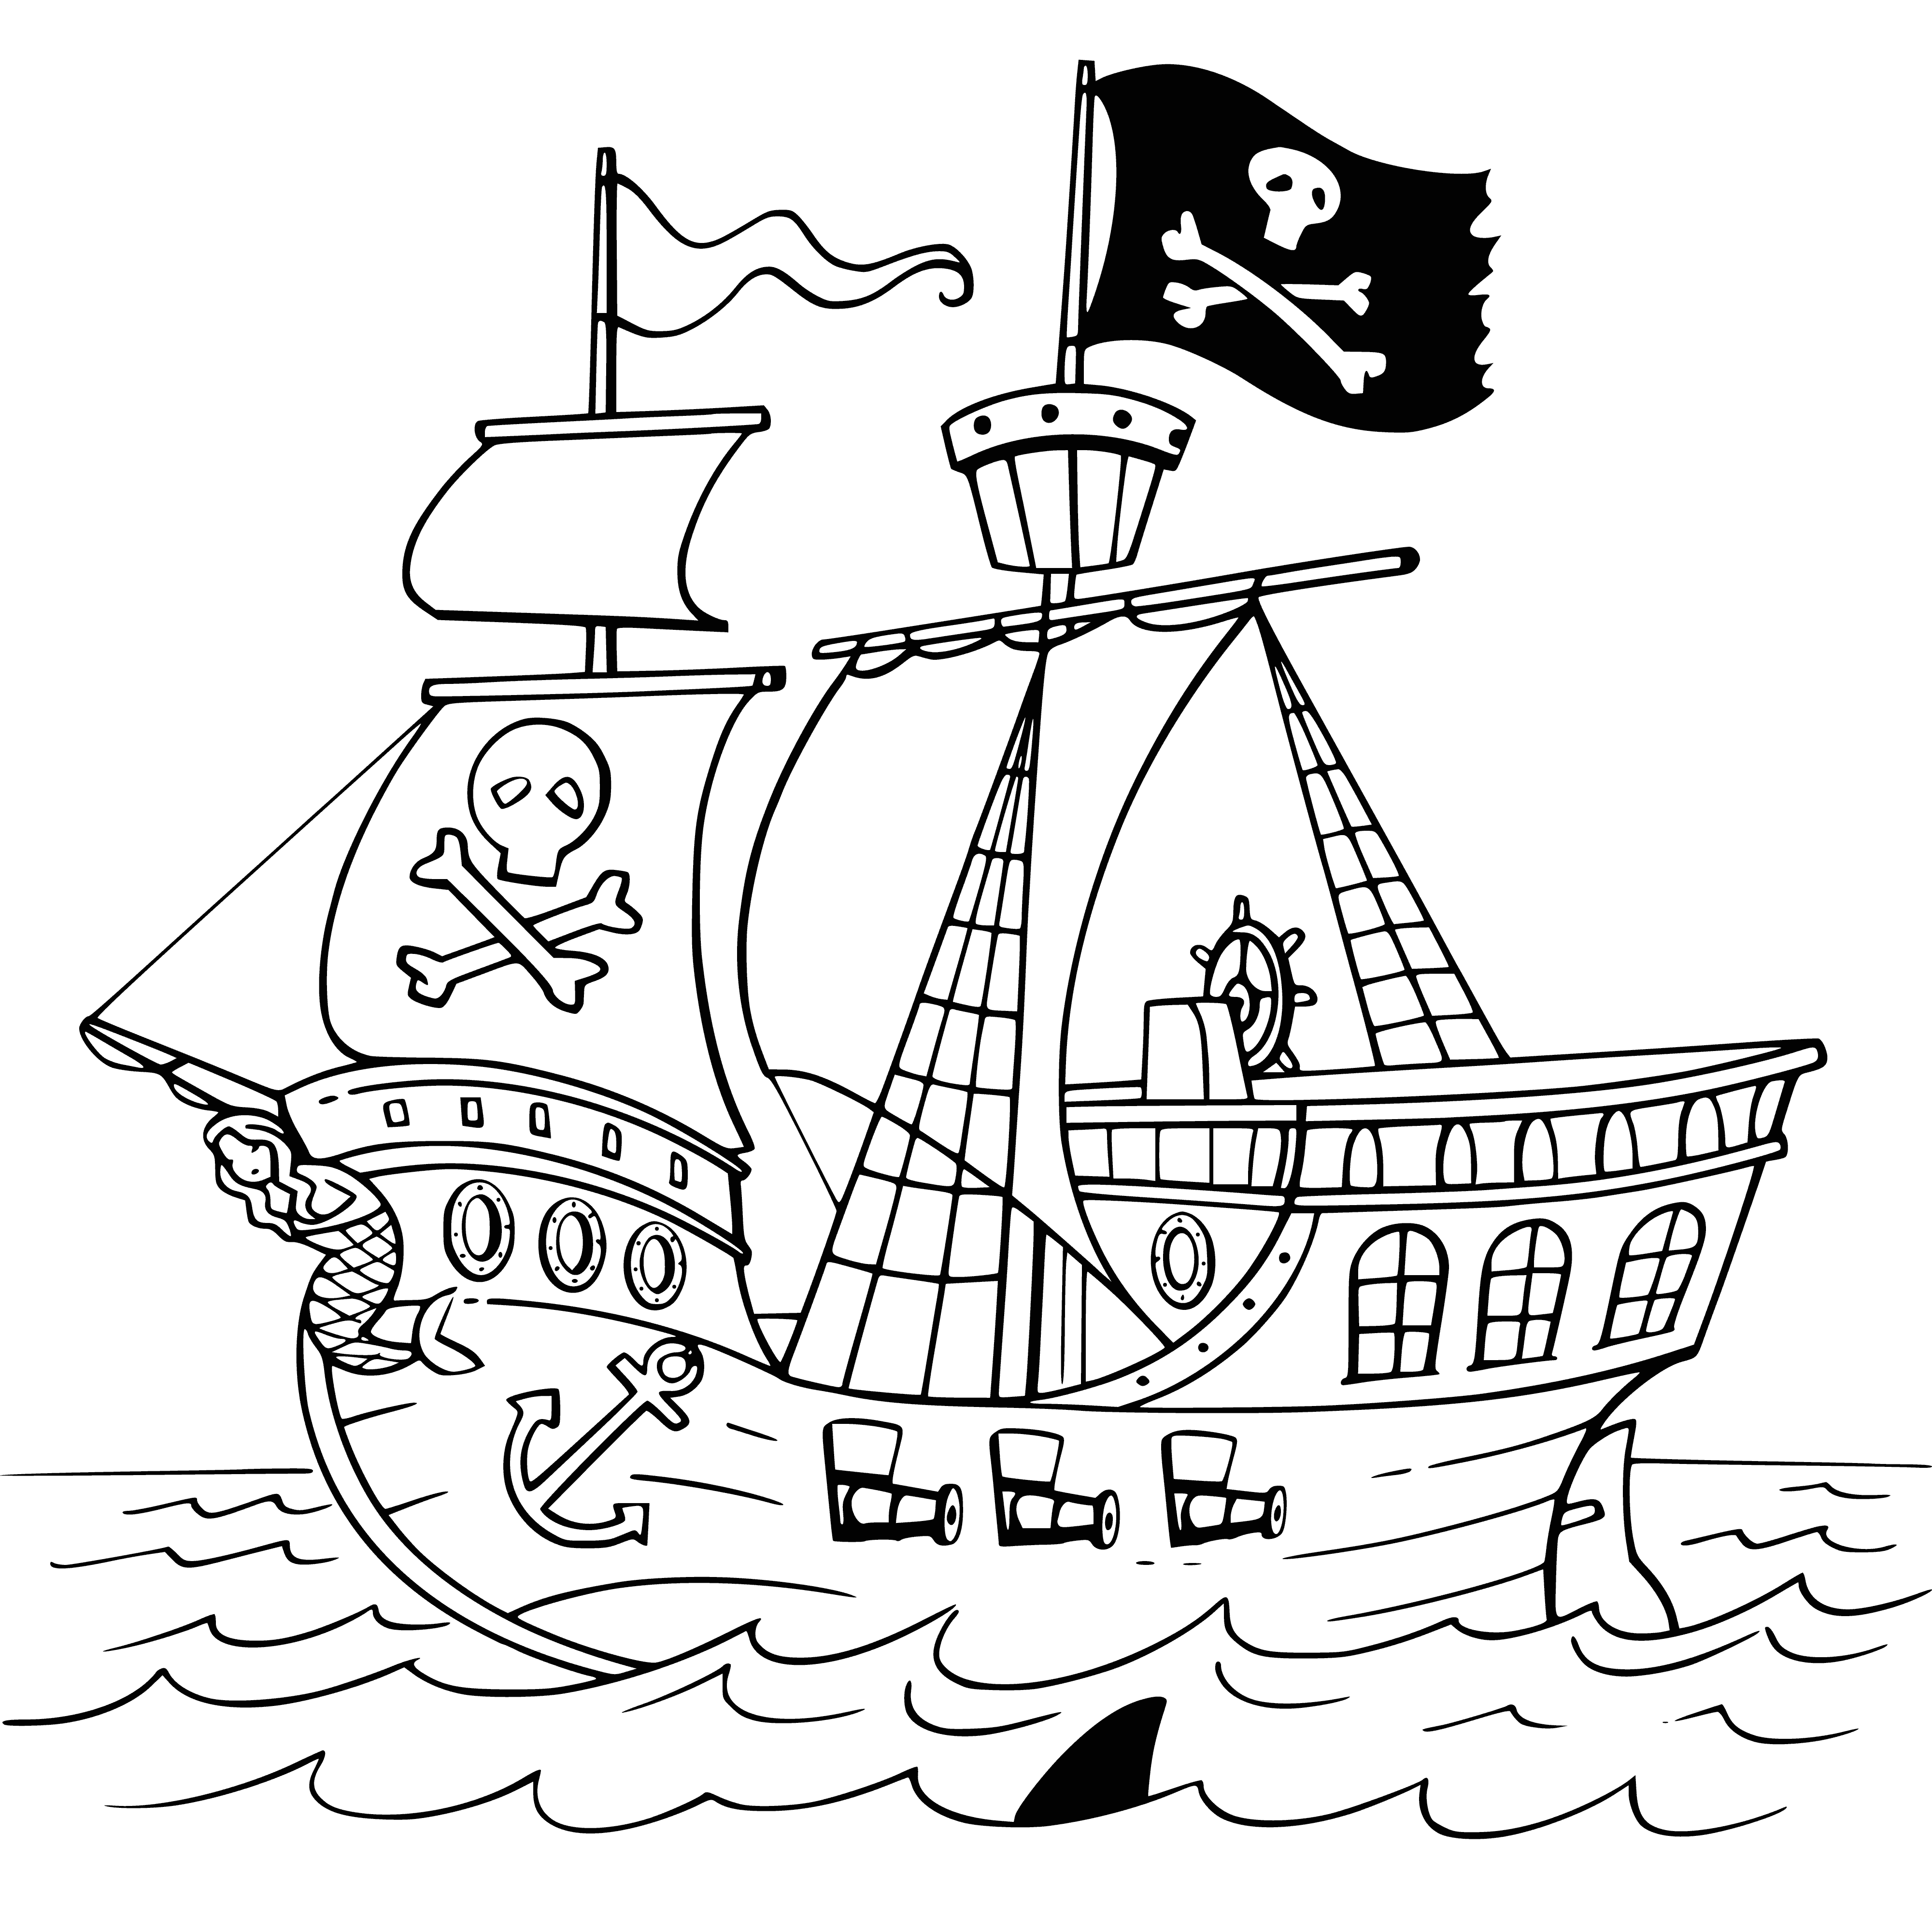 coloring page: Large boat w/ 3 sails, many levels, & figurehead in shape of dragon. Many people on deck walking, standing, & climbing ropes. Barrels, crates & mast w/ crow's nest on top.